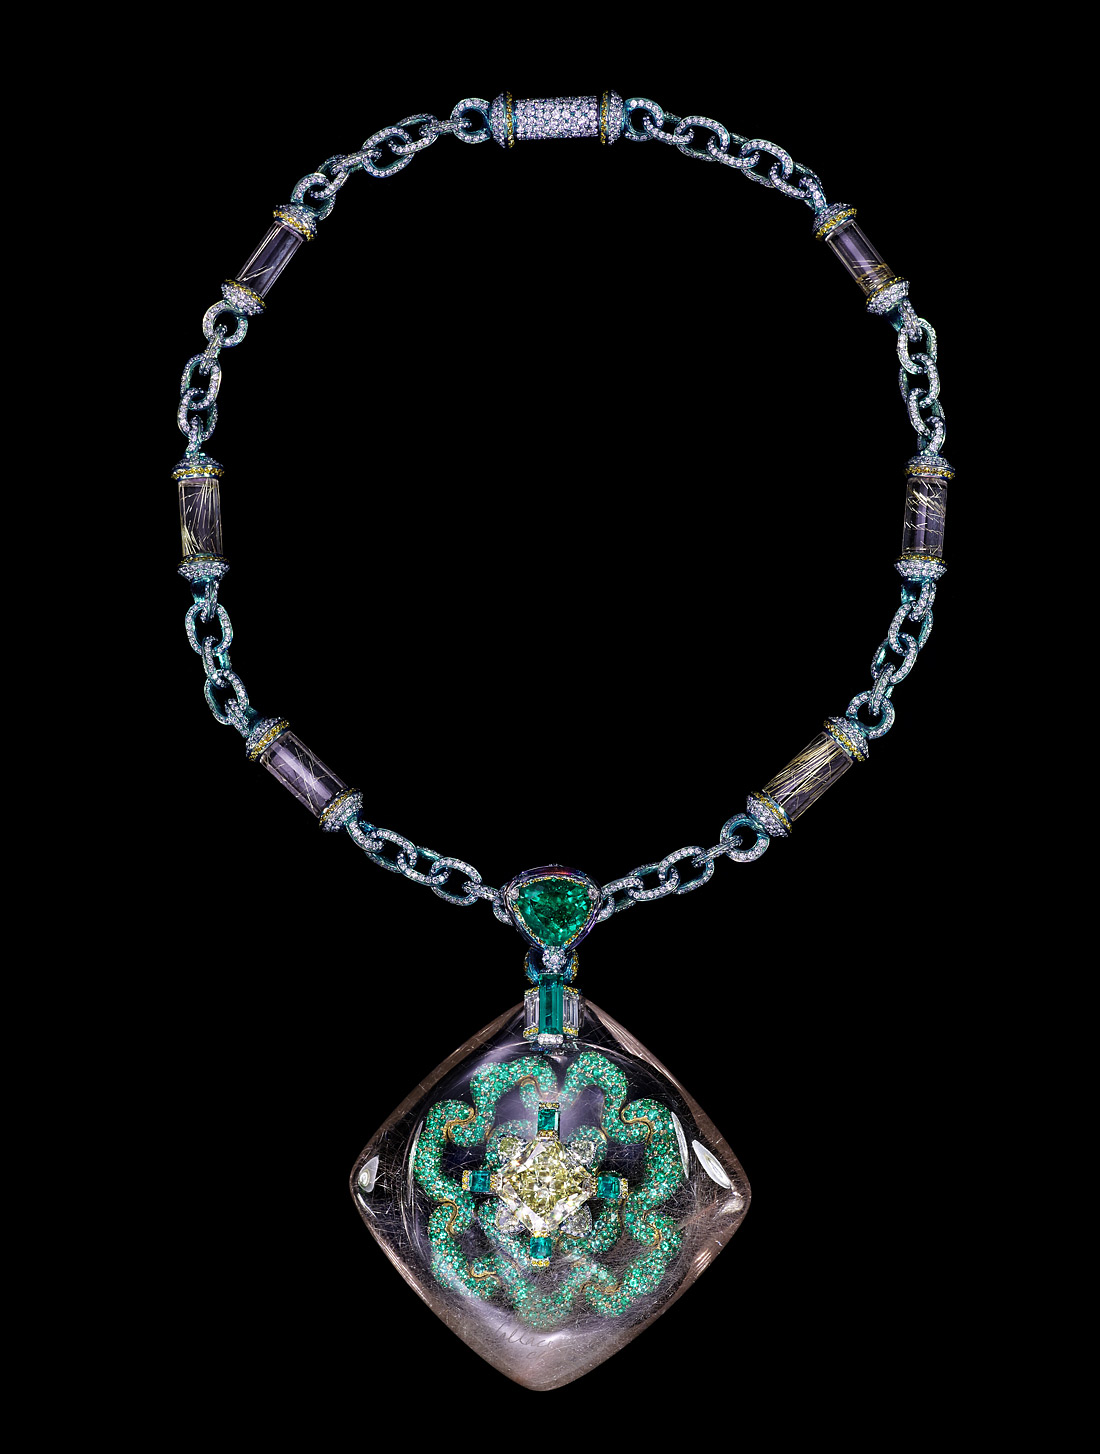 Wallace Chan Secret Abyss necklace with a yellow diamond of 10.05 cts set in a rutilated quartz shell of 211.74ct and complemented with emeralds, fancy colored diamonds, amethysts and rutilated quartz